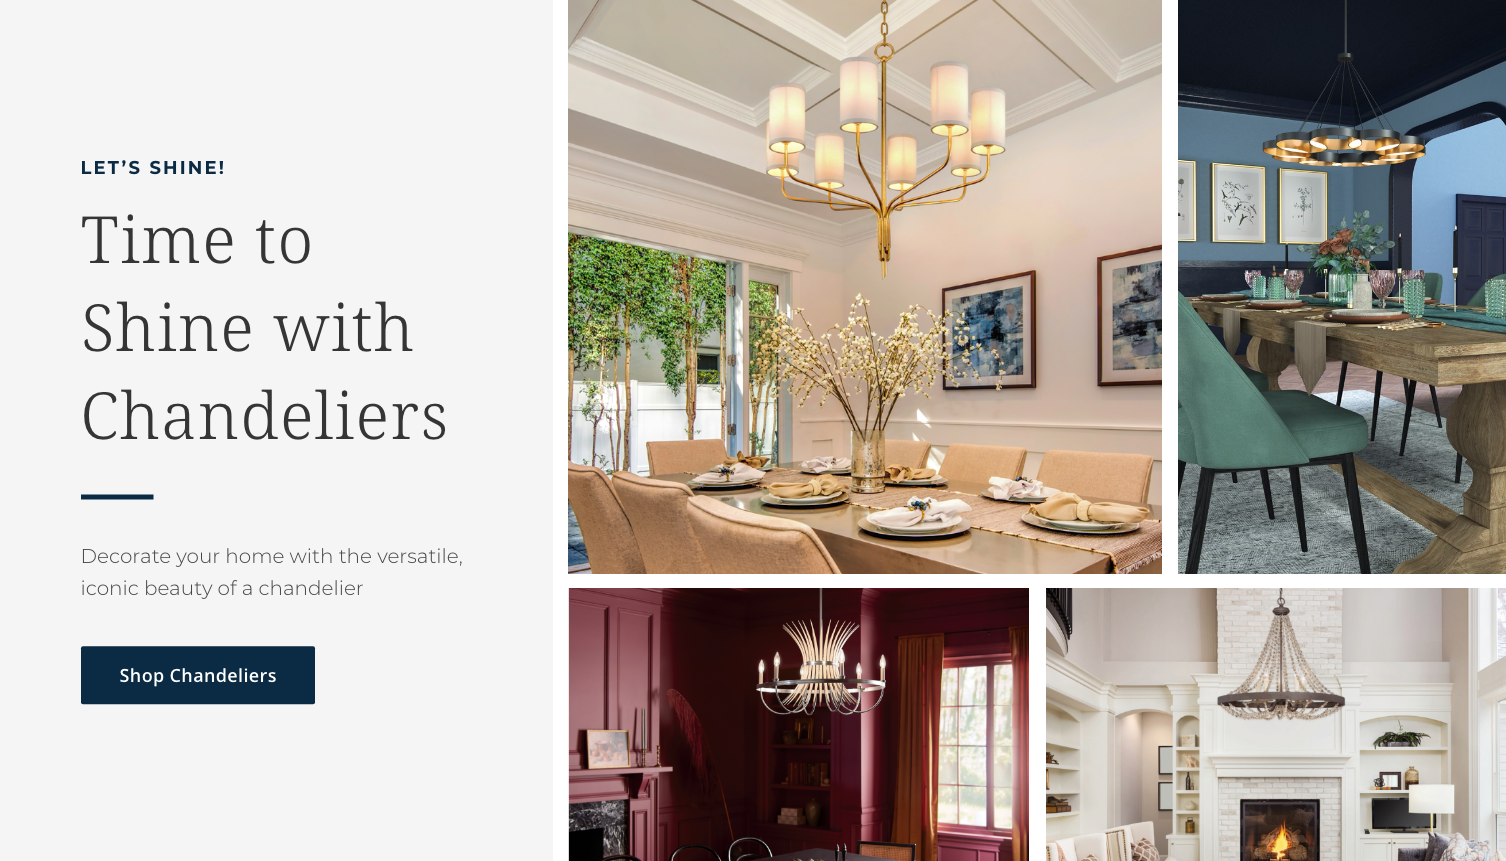 Time to Shine with Chandeliers - Shop Chandeliers now